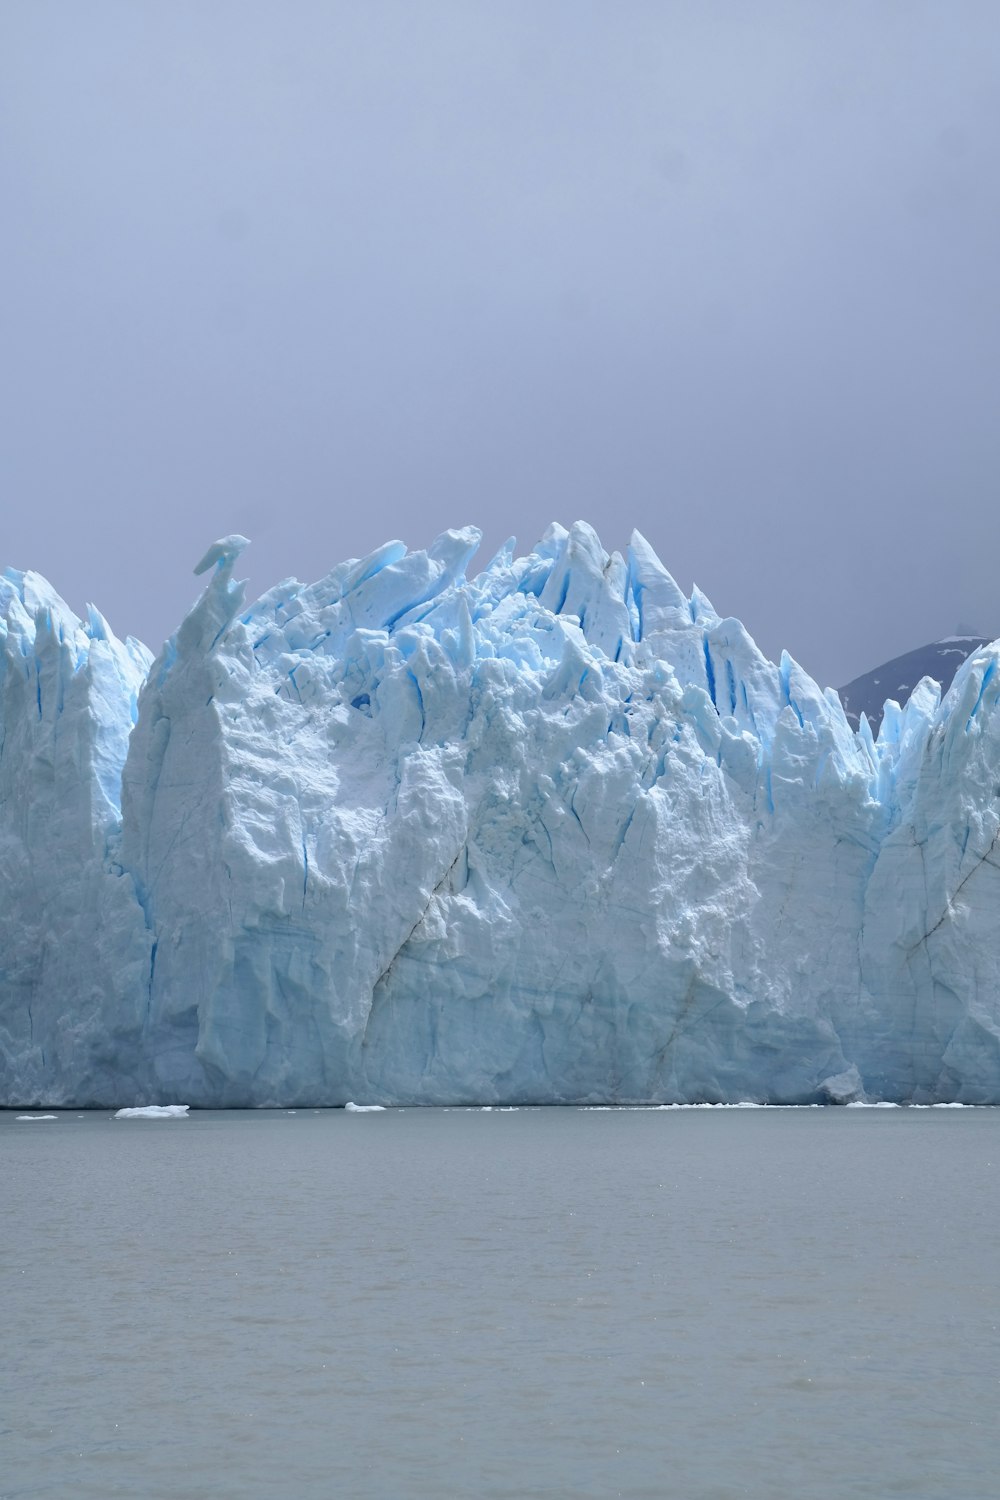 a large iceberg in the middle of a body of water